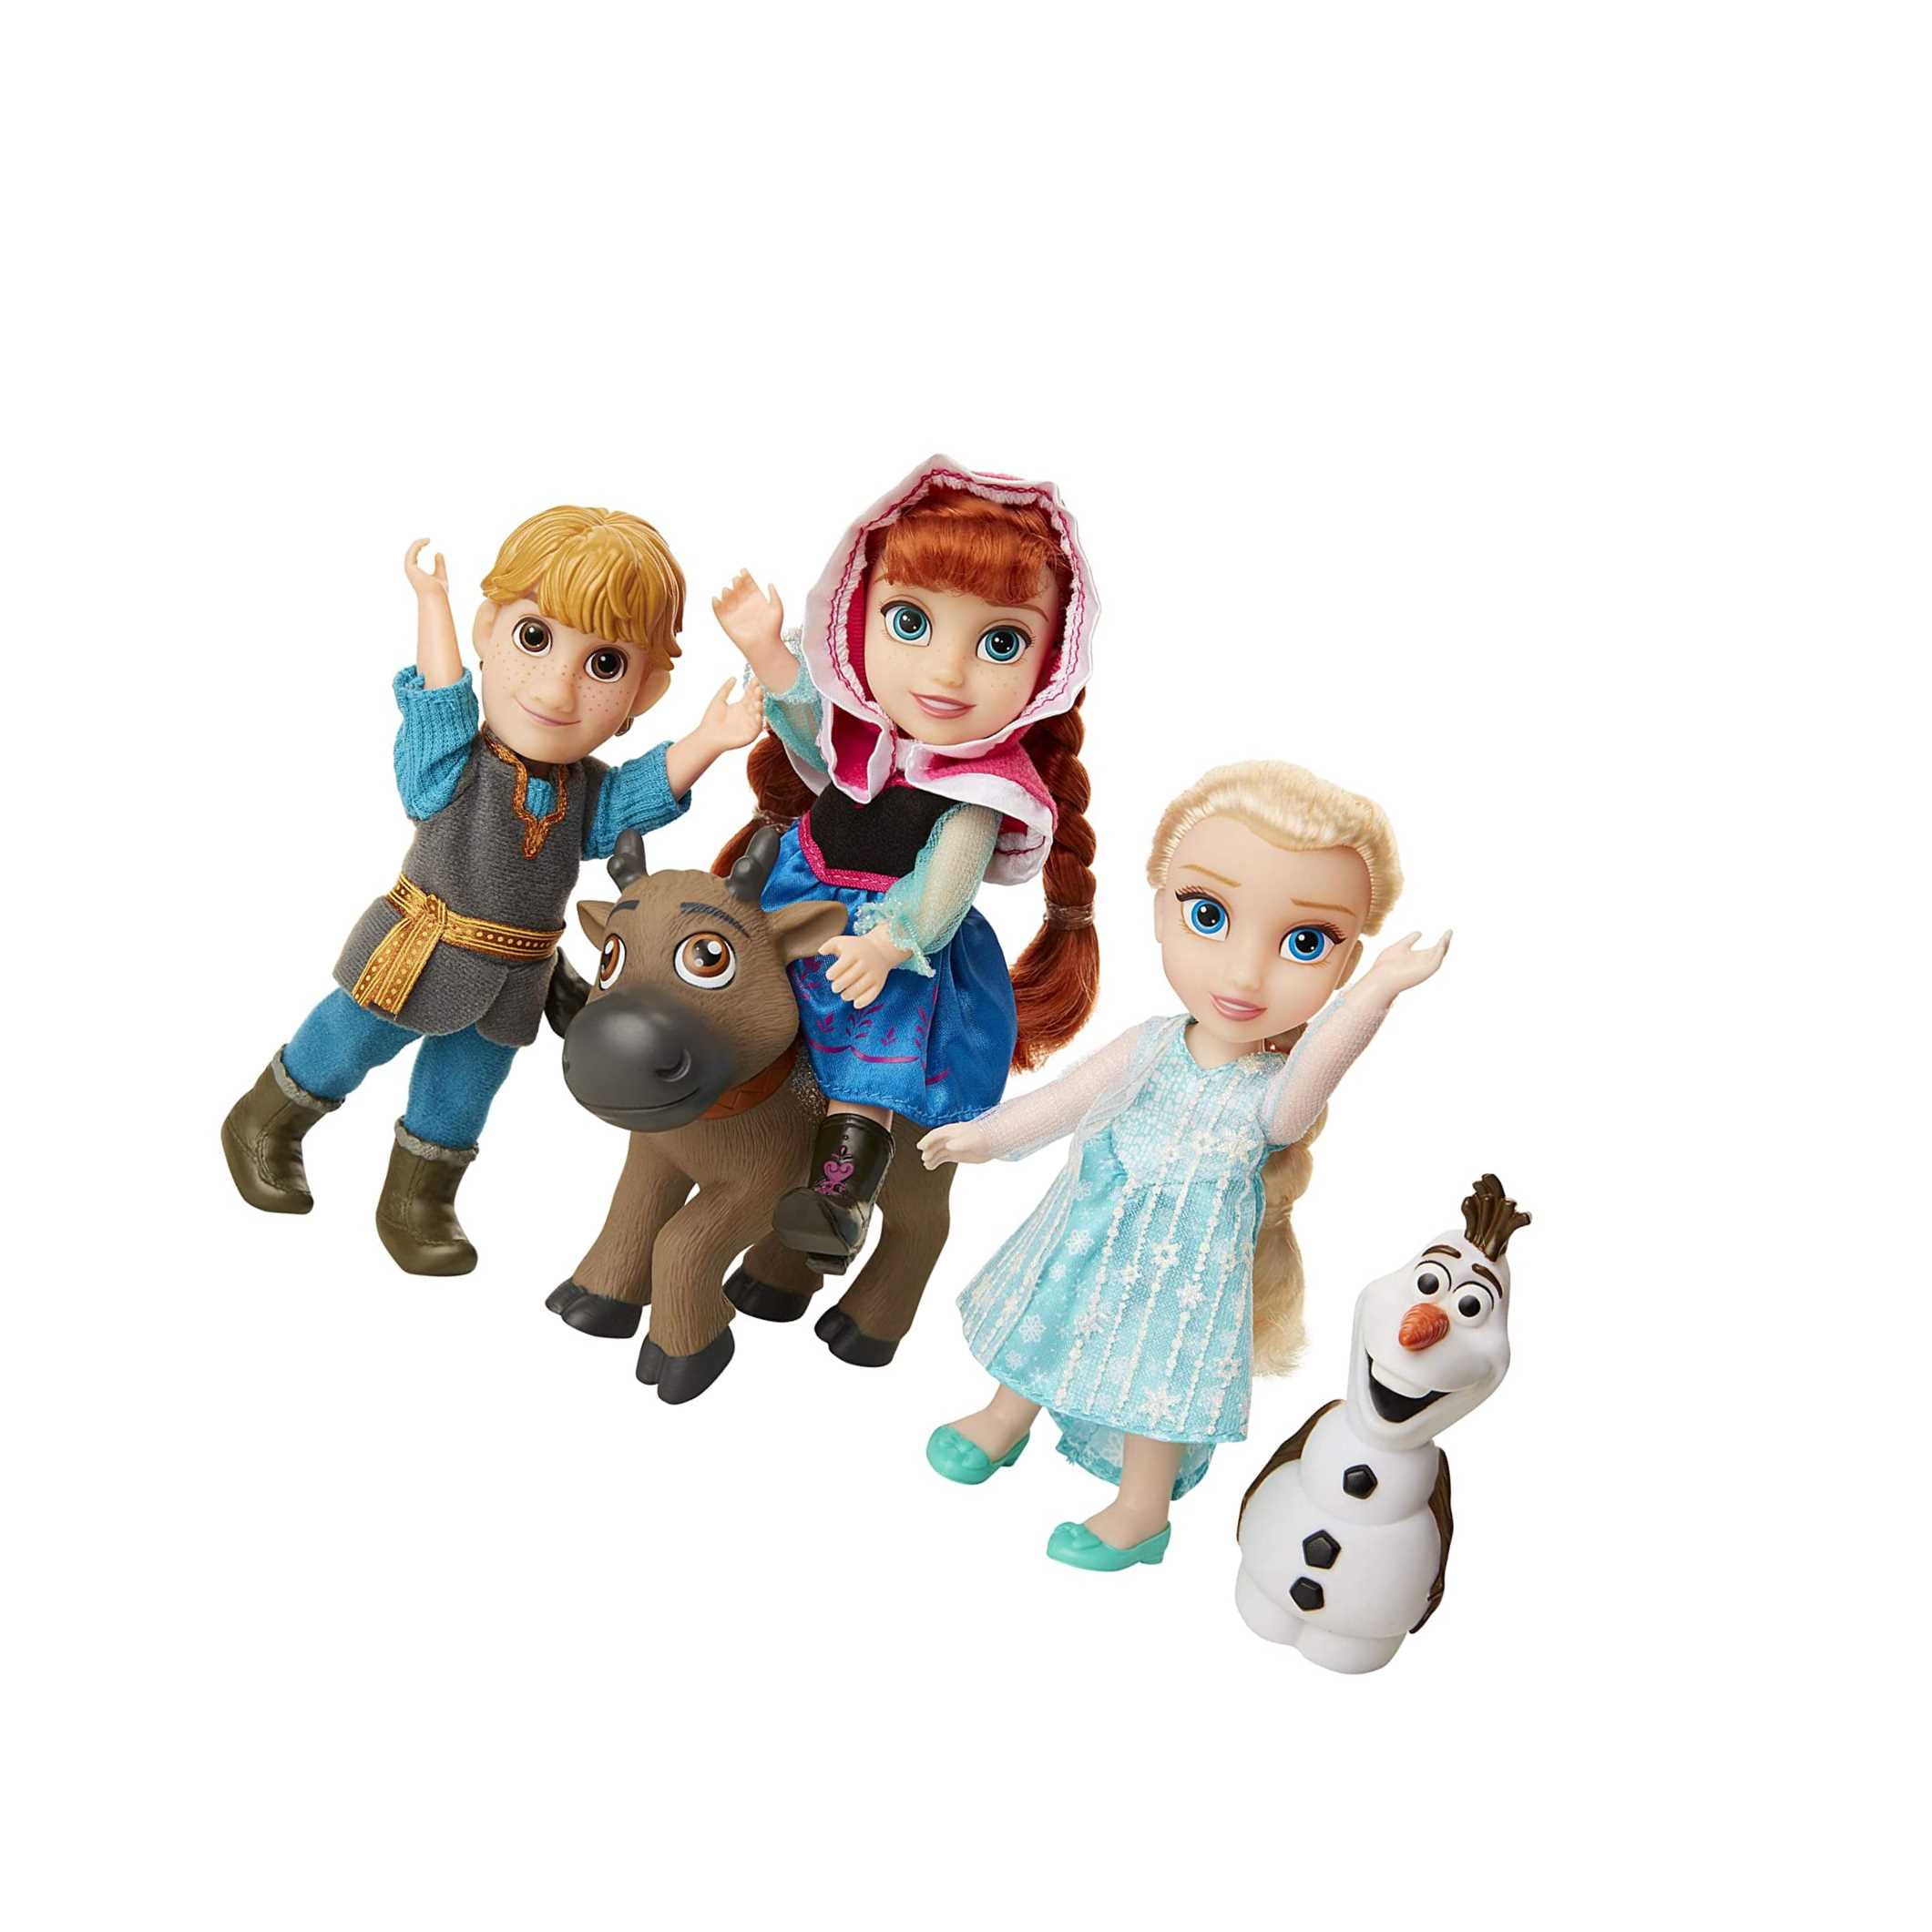 Buy Deluxe Petite Doll Gift Set - Includes Anna, Elsa, Kristoff, Sven And  Olaf! Dolls Are Approximately 6 Inches Tall - Perfect For Any Frozen Fan  Online at Lowest Price in Ubuy Russia. 354572265